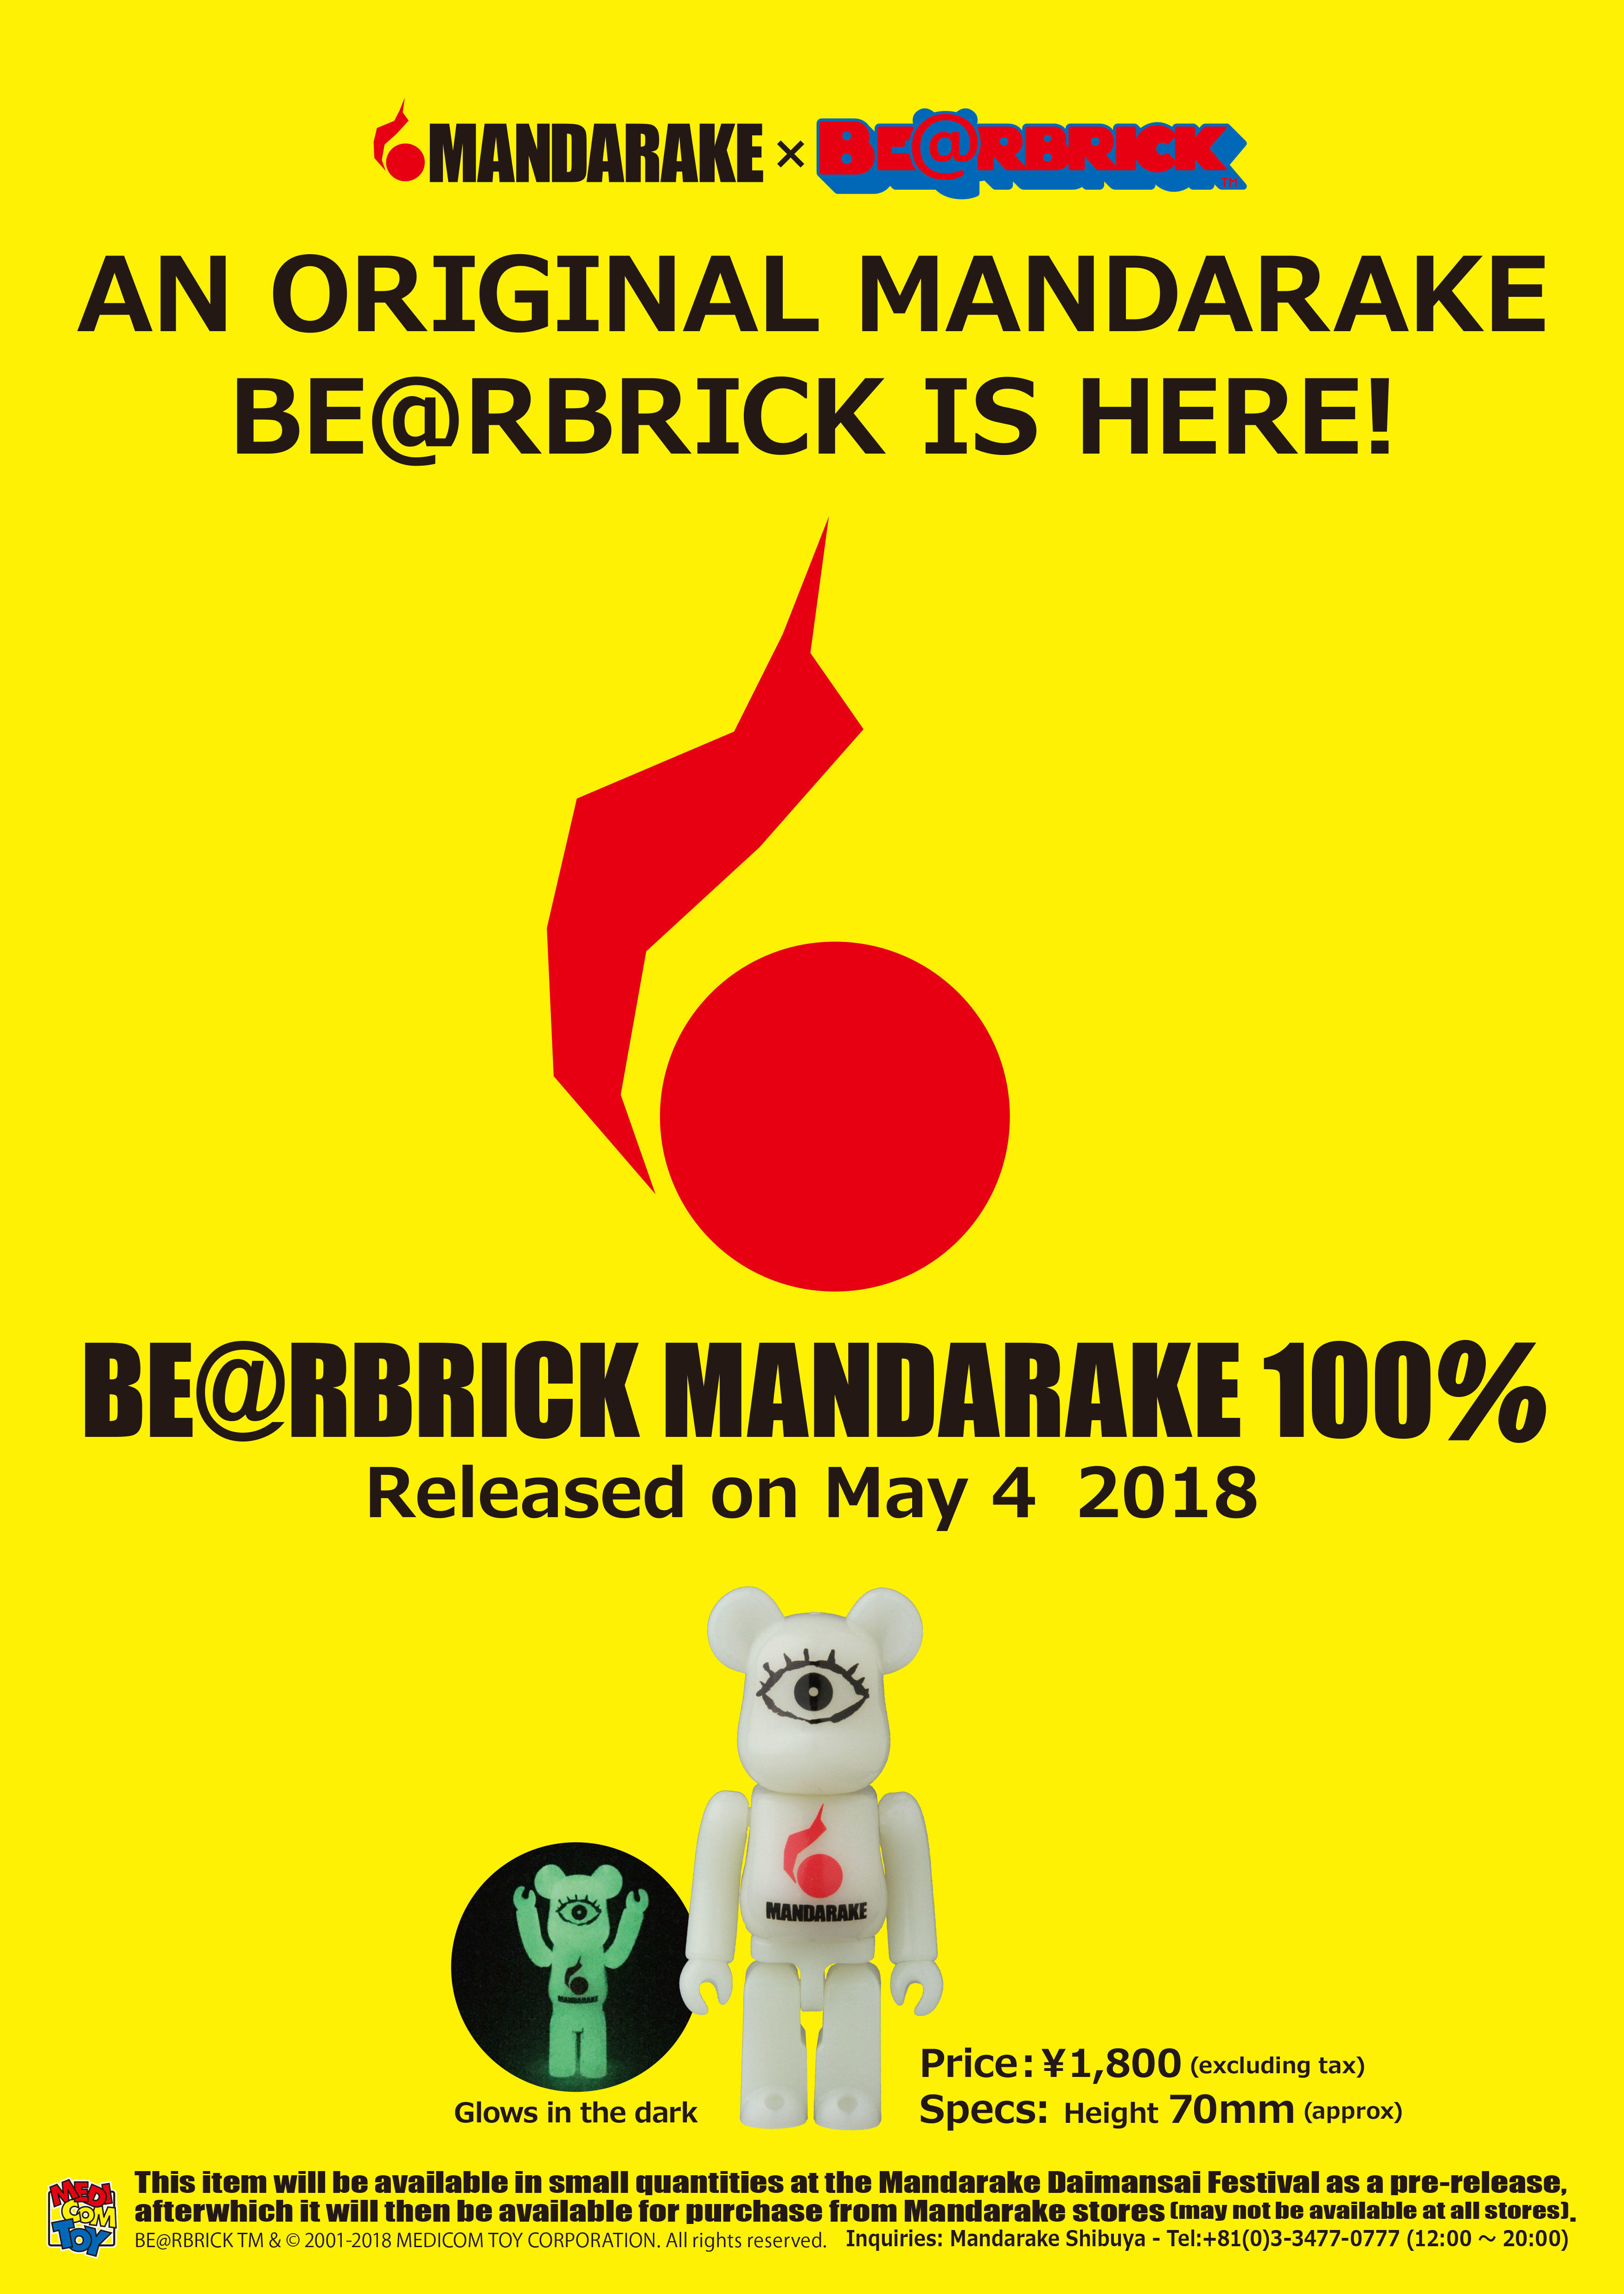 An original Mandarake Be@rbrick is here! Released on May 4 2018. Price: 1,800 yen (plus tax). 70mm in height, glows in the dark. This item will be available in small quantities at the Mandarake Daimansai Festival as a pre-release, after which it will then be available for purchase from Mandarake stores (may not be available at all stores). BE@RBRICK TM & C 2001-2018 MEDICOM TOY CORPORATION. All rights reserved. Inquiried - Mandarake Shibuya.